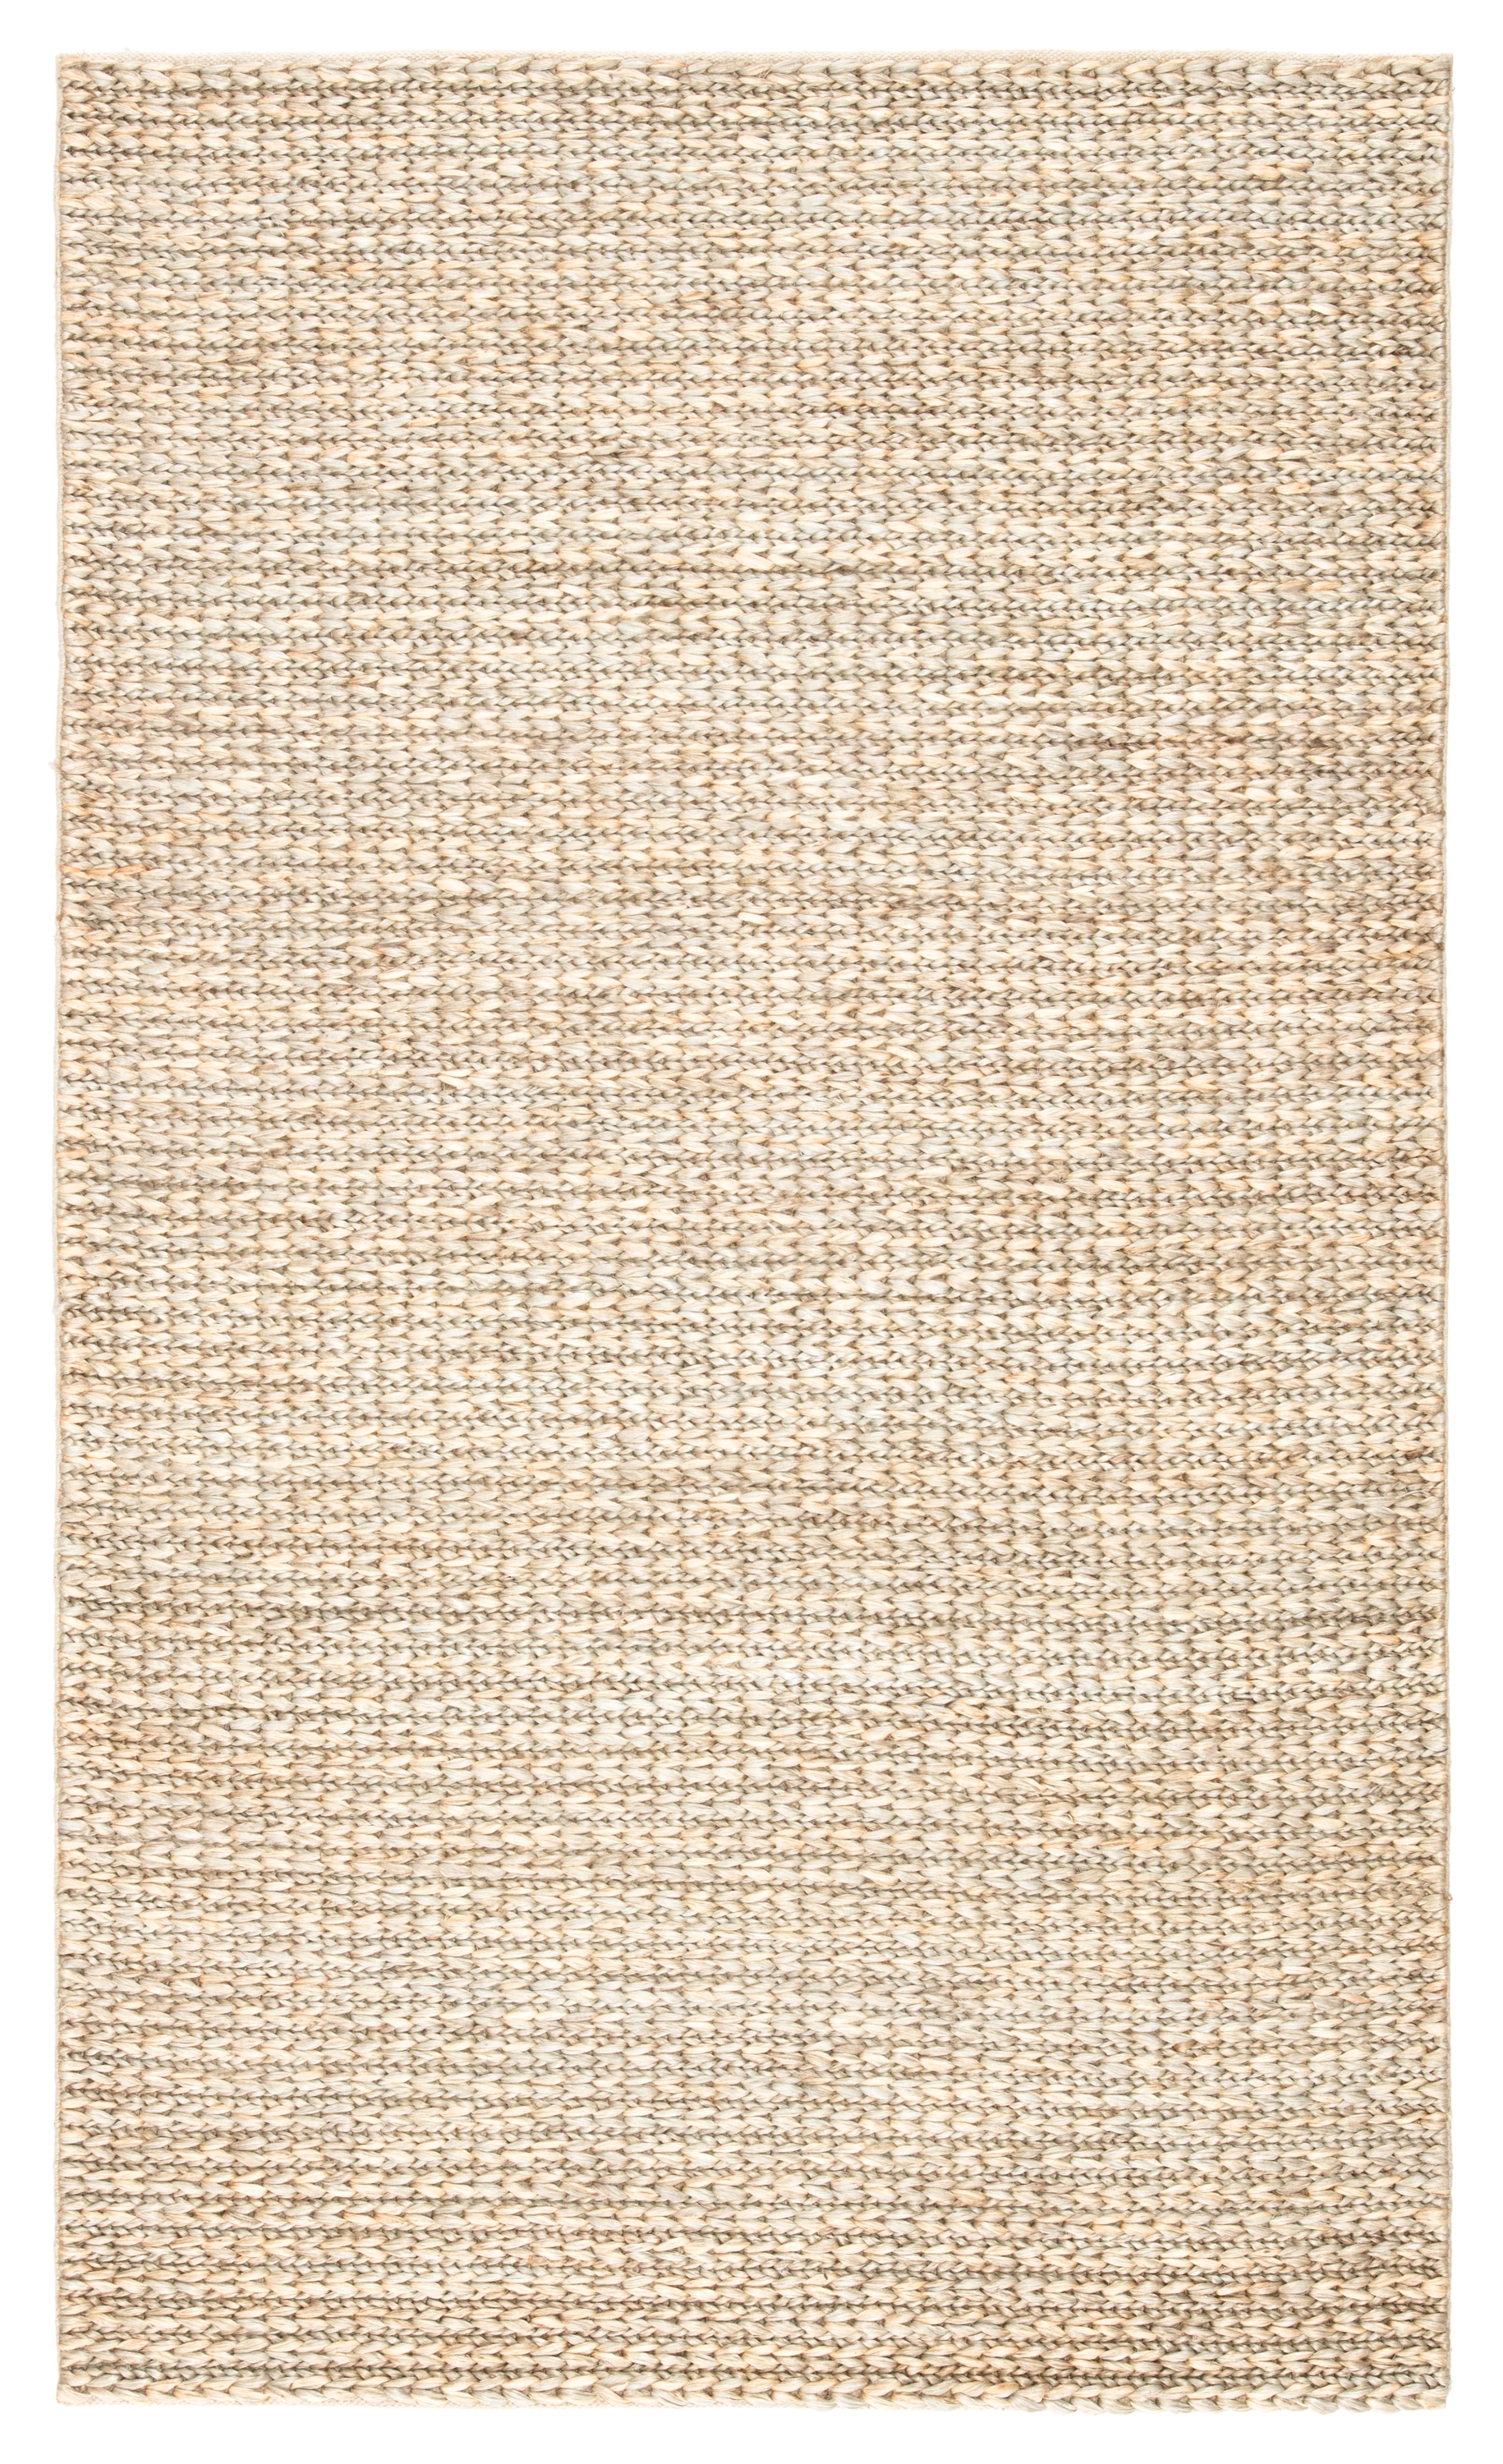 Calista Natural Solid Tan/ Greige Area Rug (8'X10') - Image 0